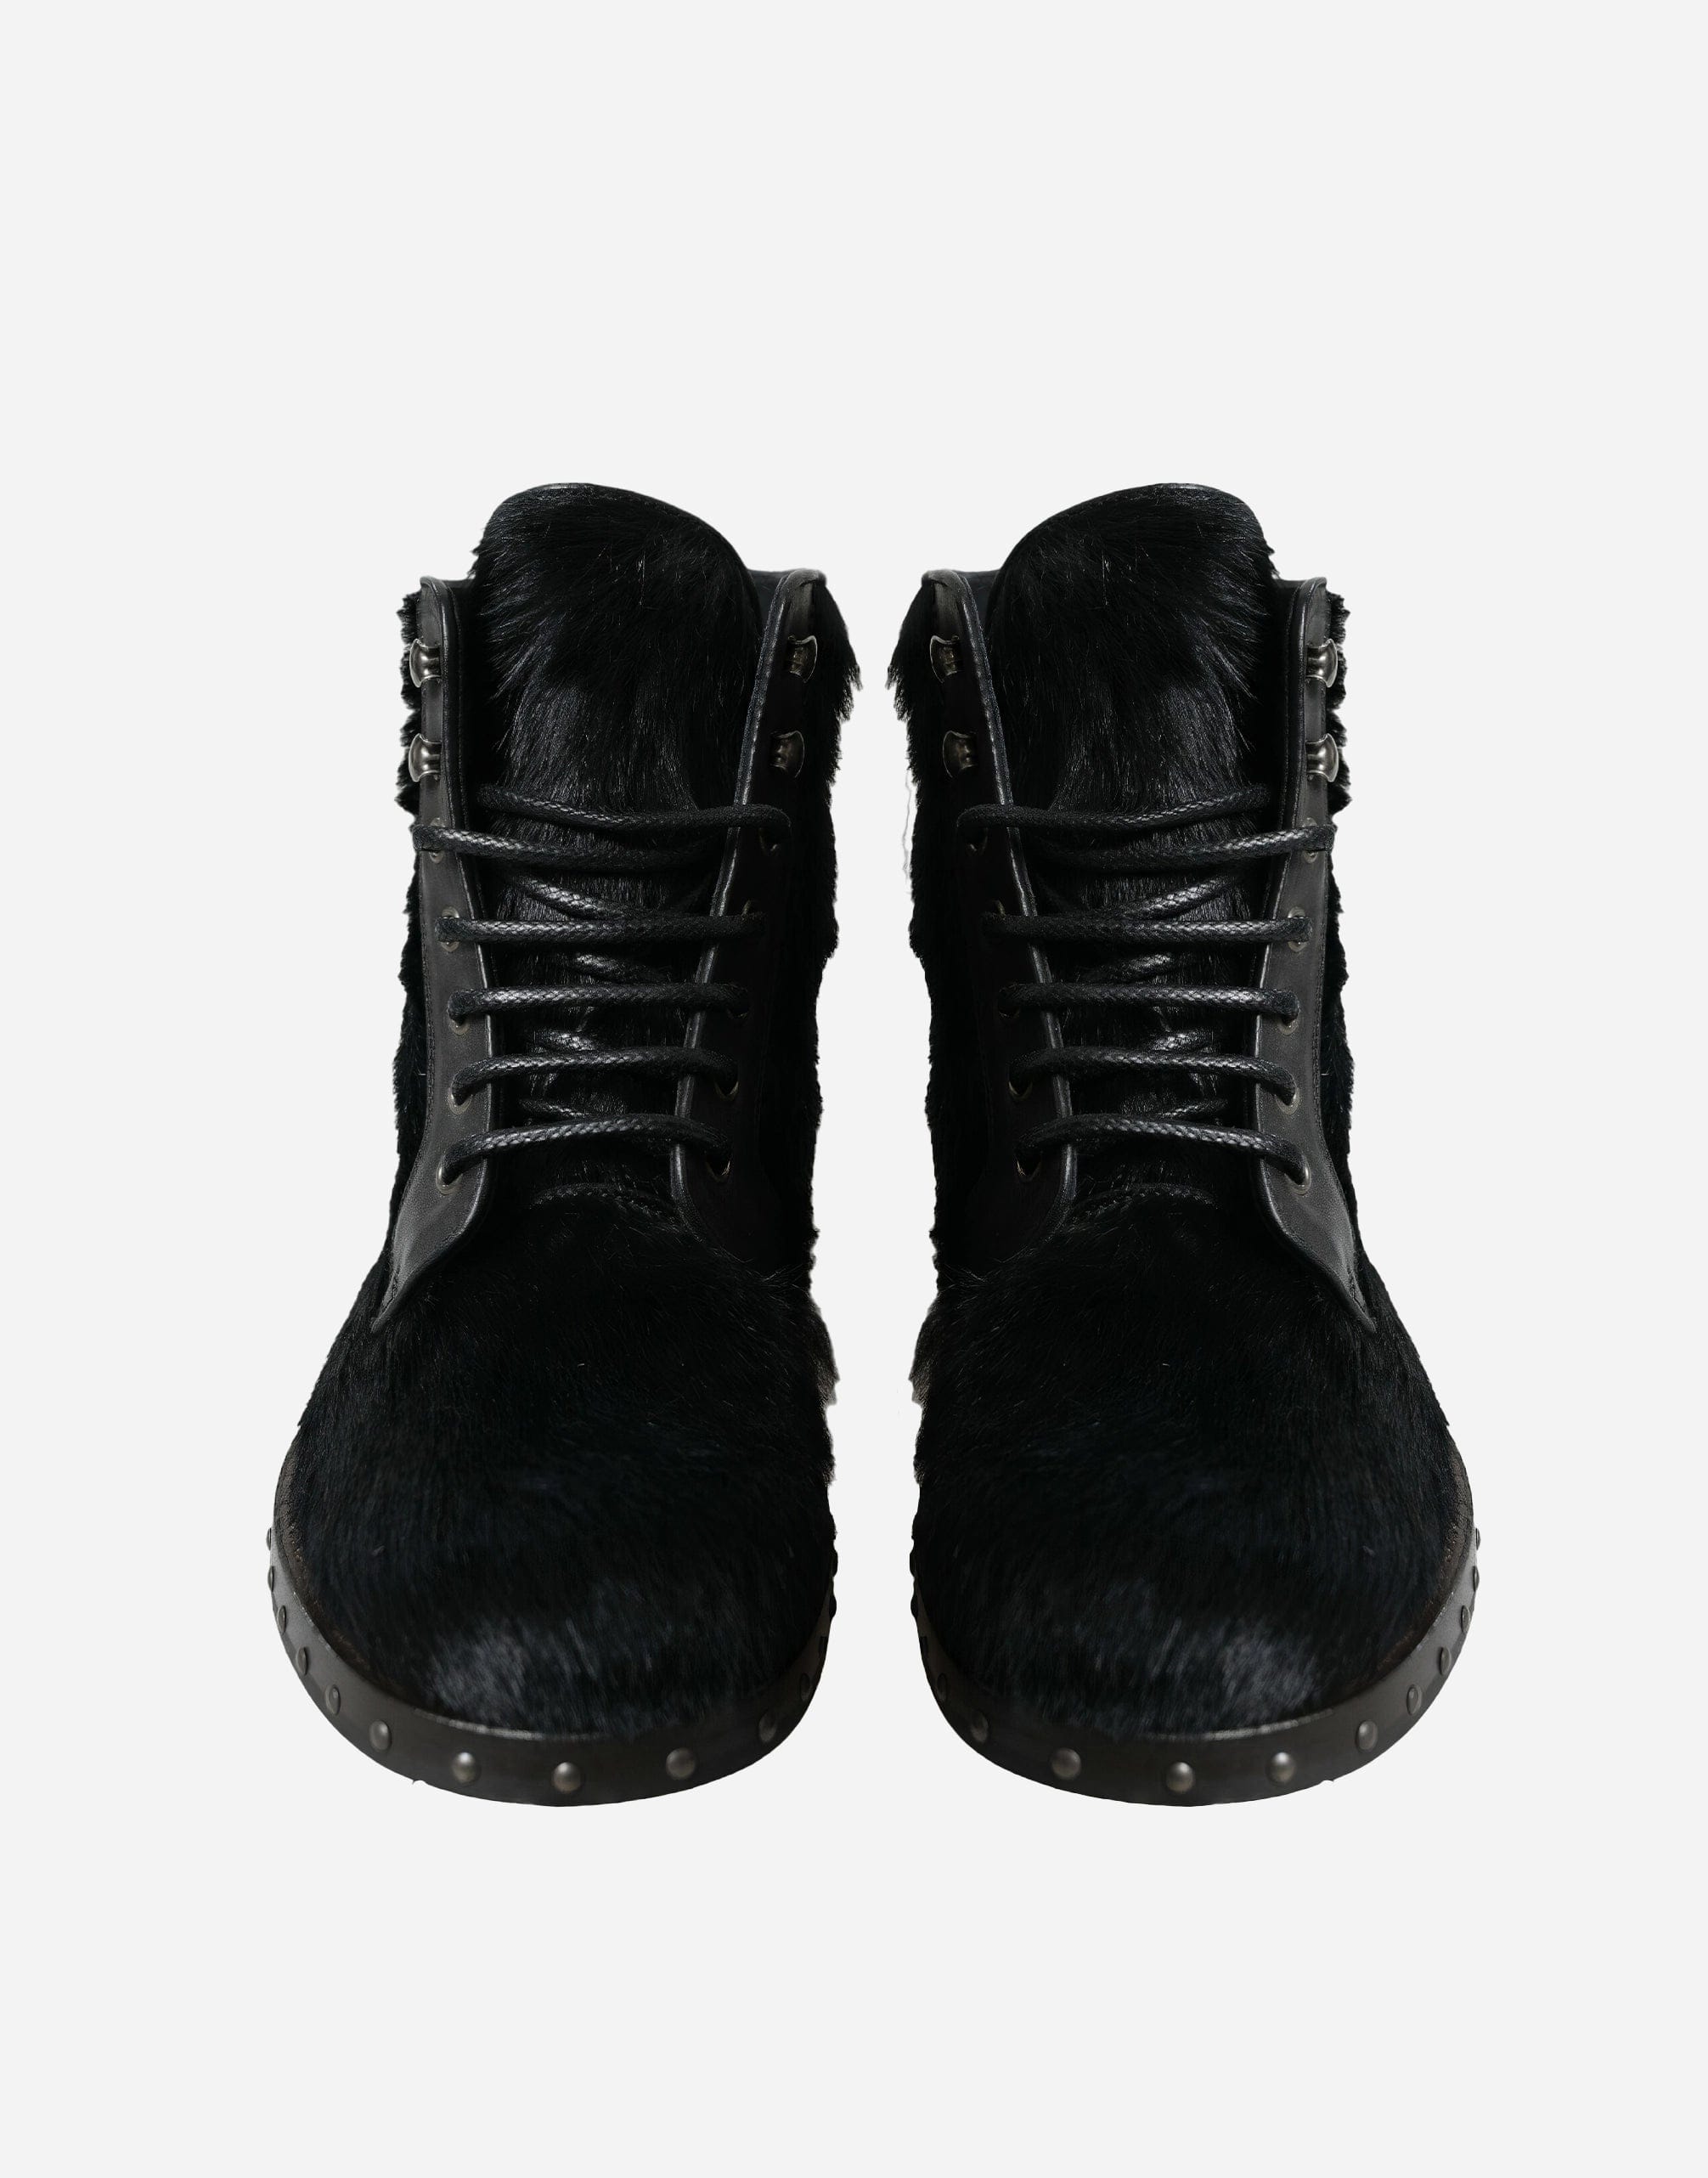 Dolce & Gabbana Pony-Style Leather Boots